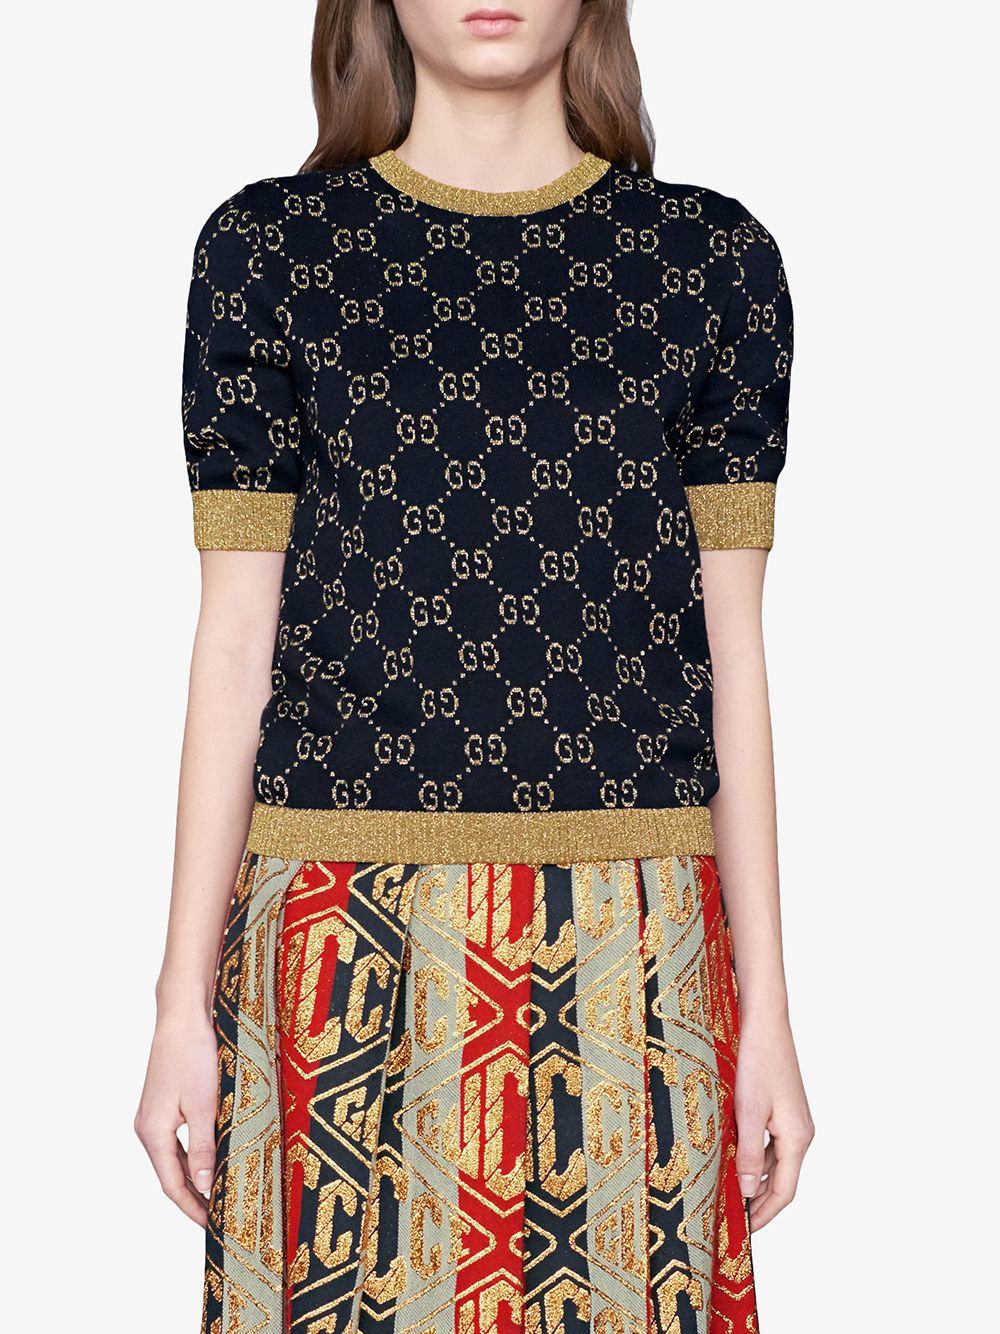 GUCCI Blue Knit Top with Signature GG Print and Lurex Detailing